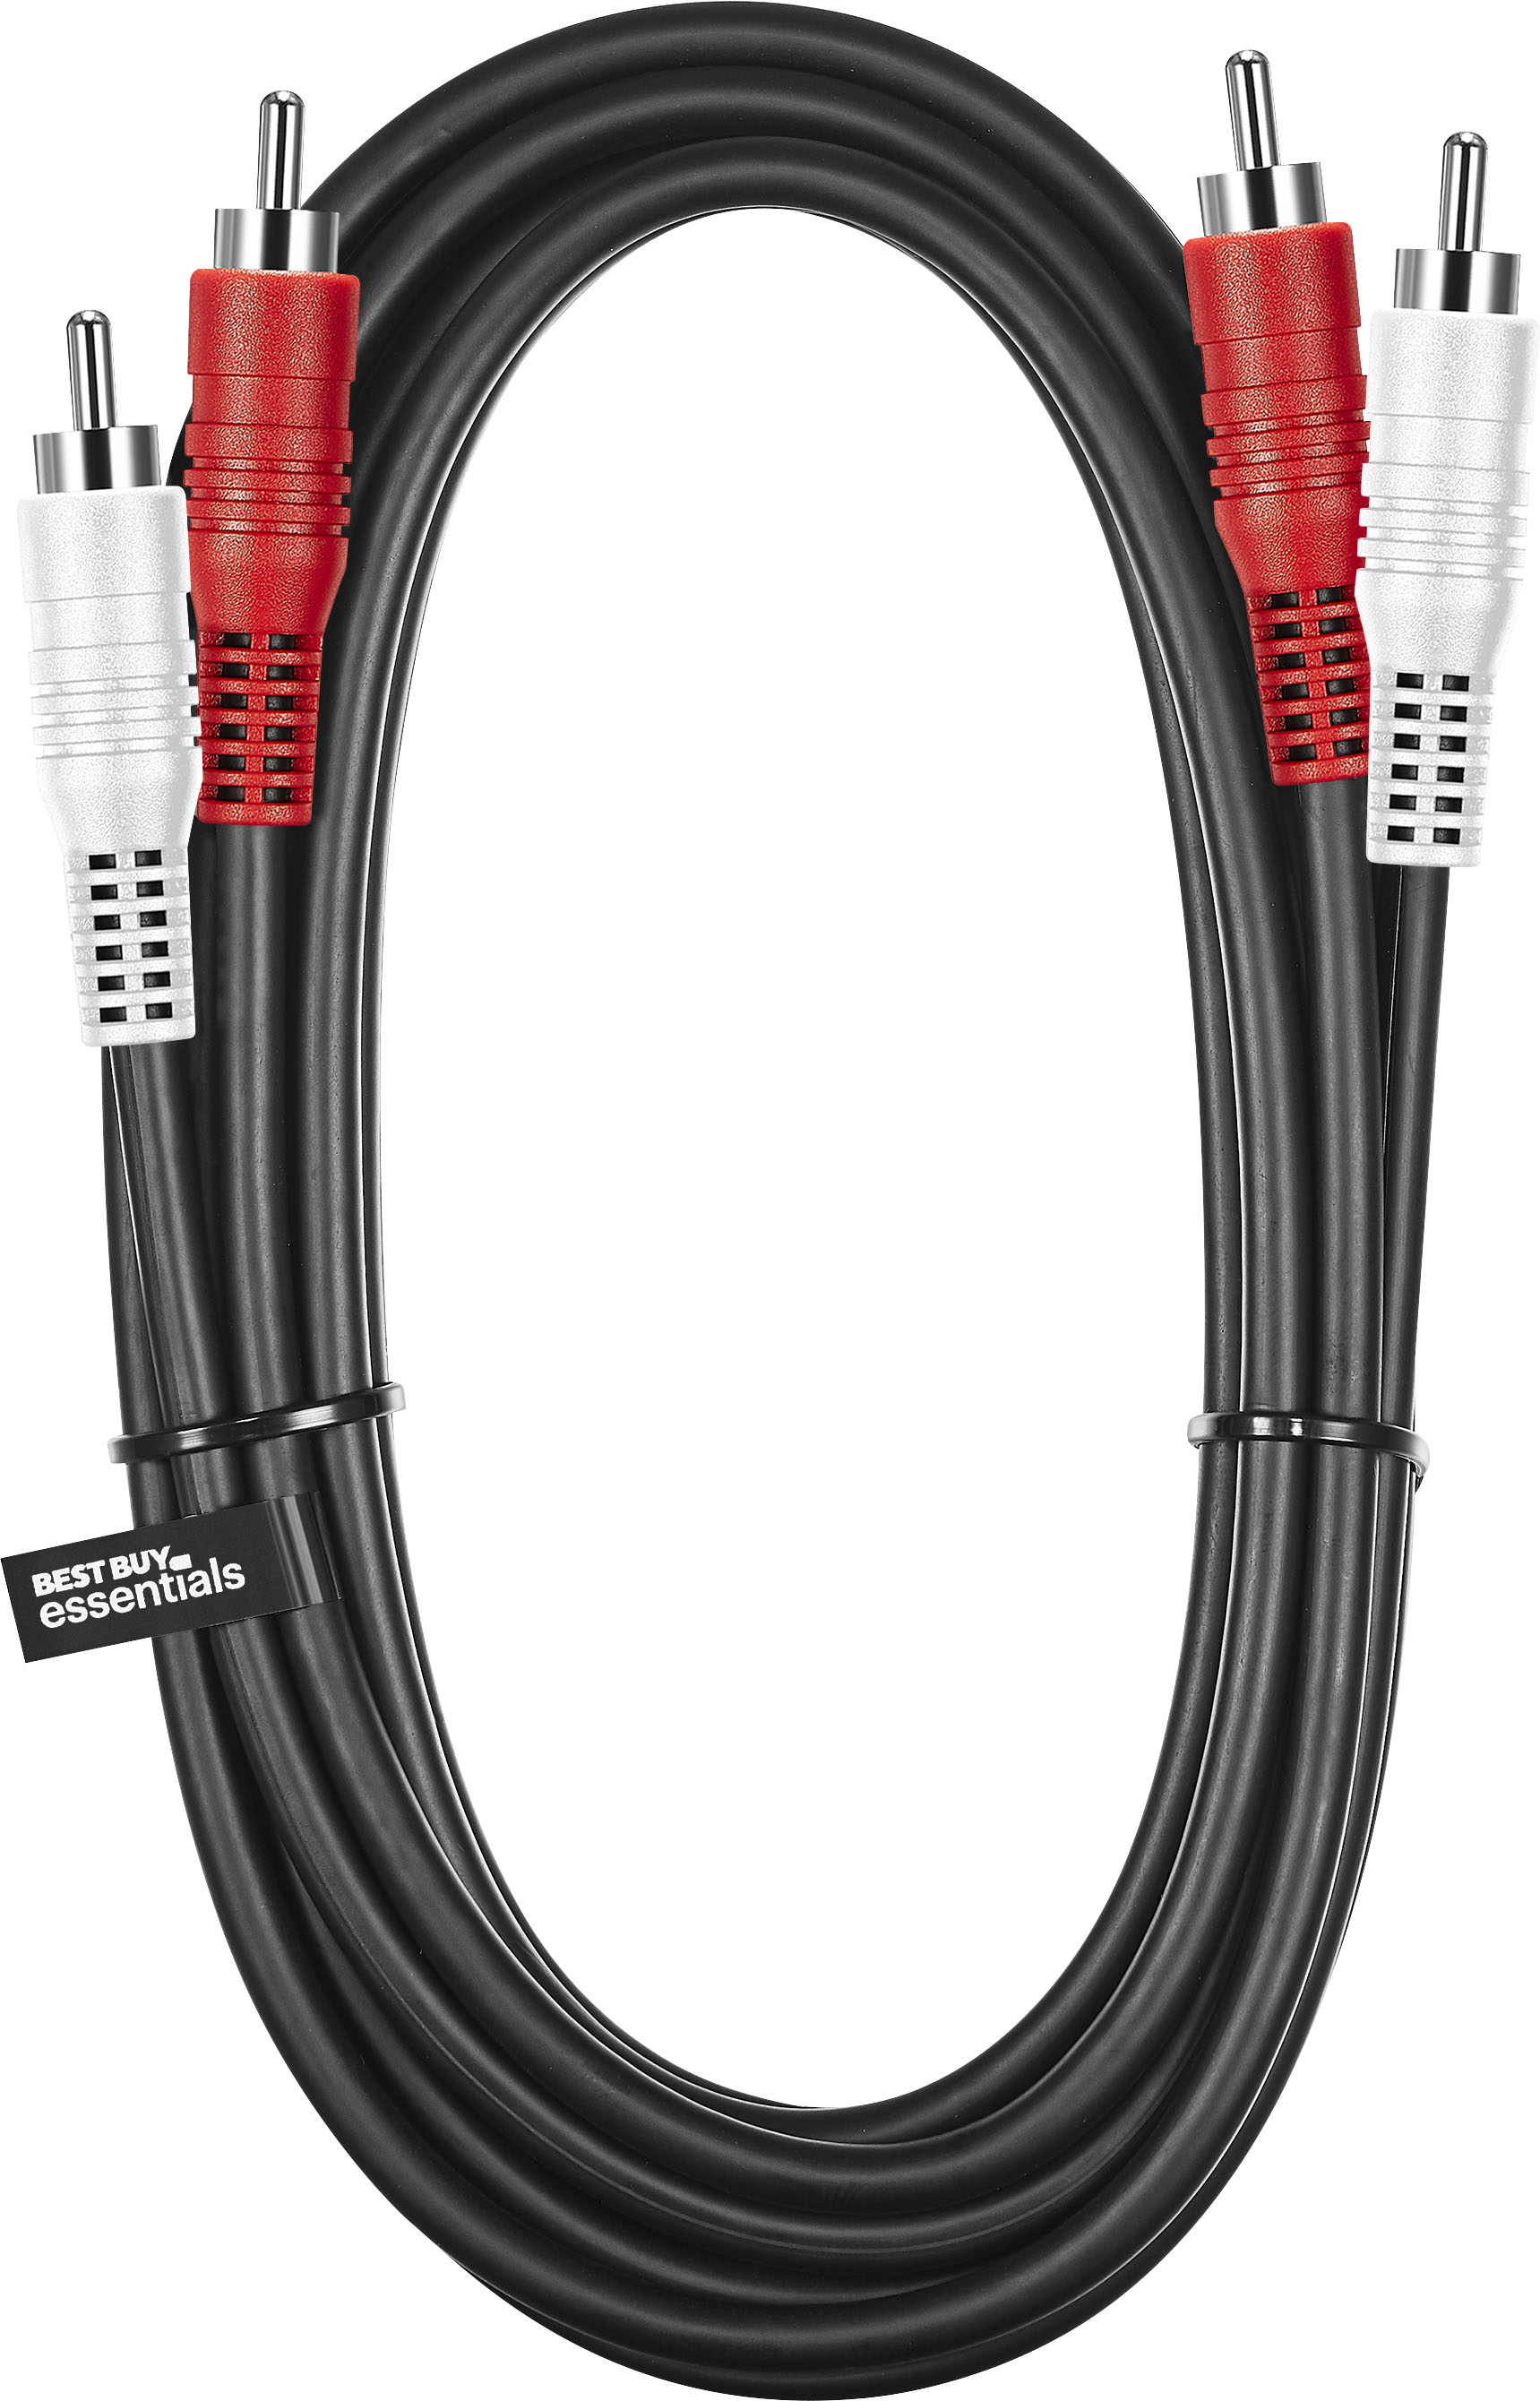 6ft (1.8m) Value Series™ RCA Stereo Audio Cable, Audio Cables, AV Cables